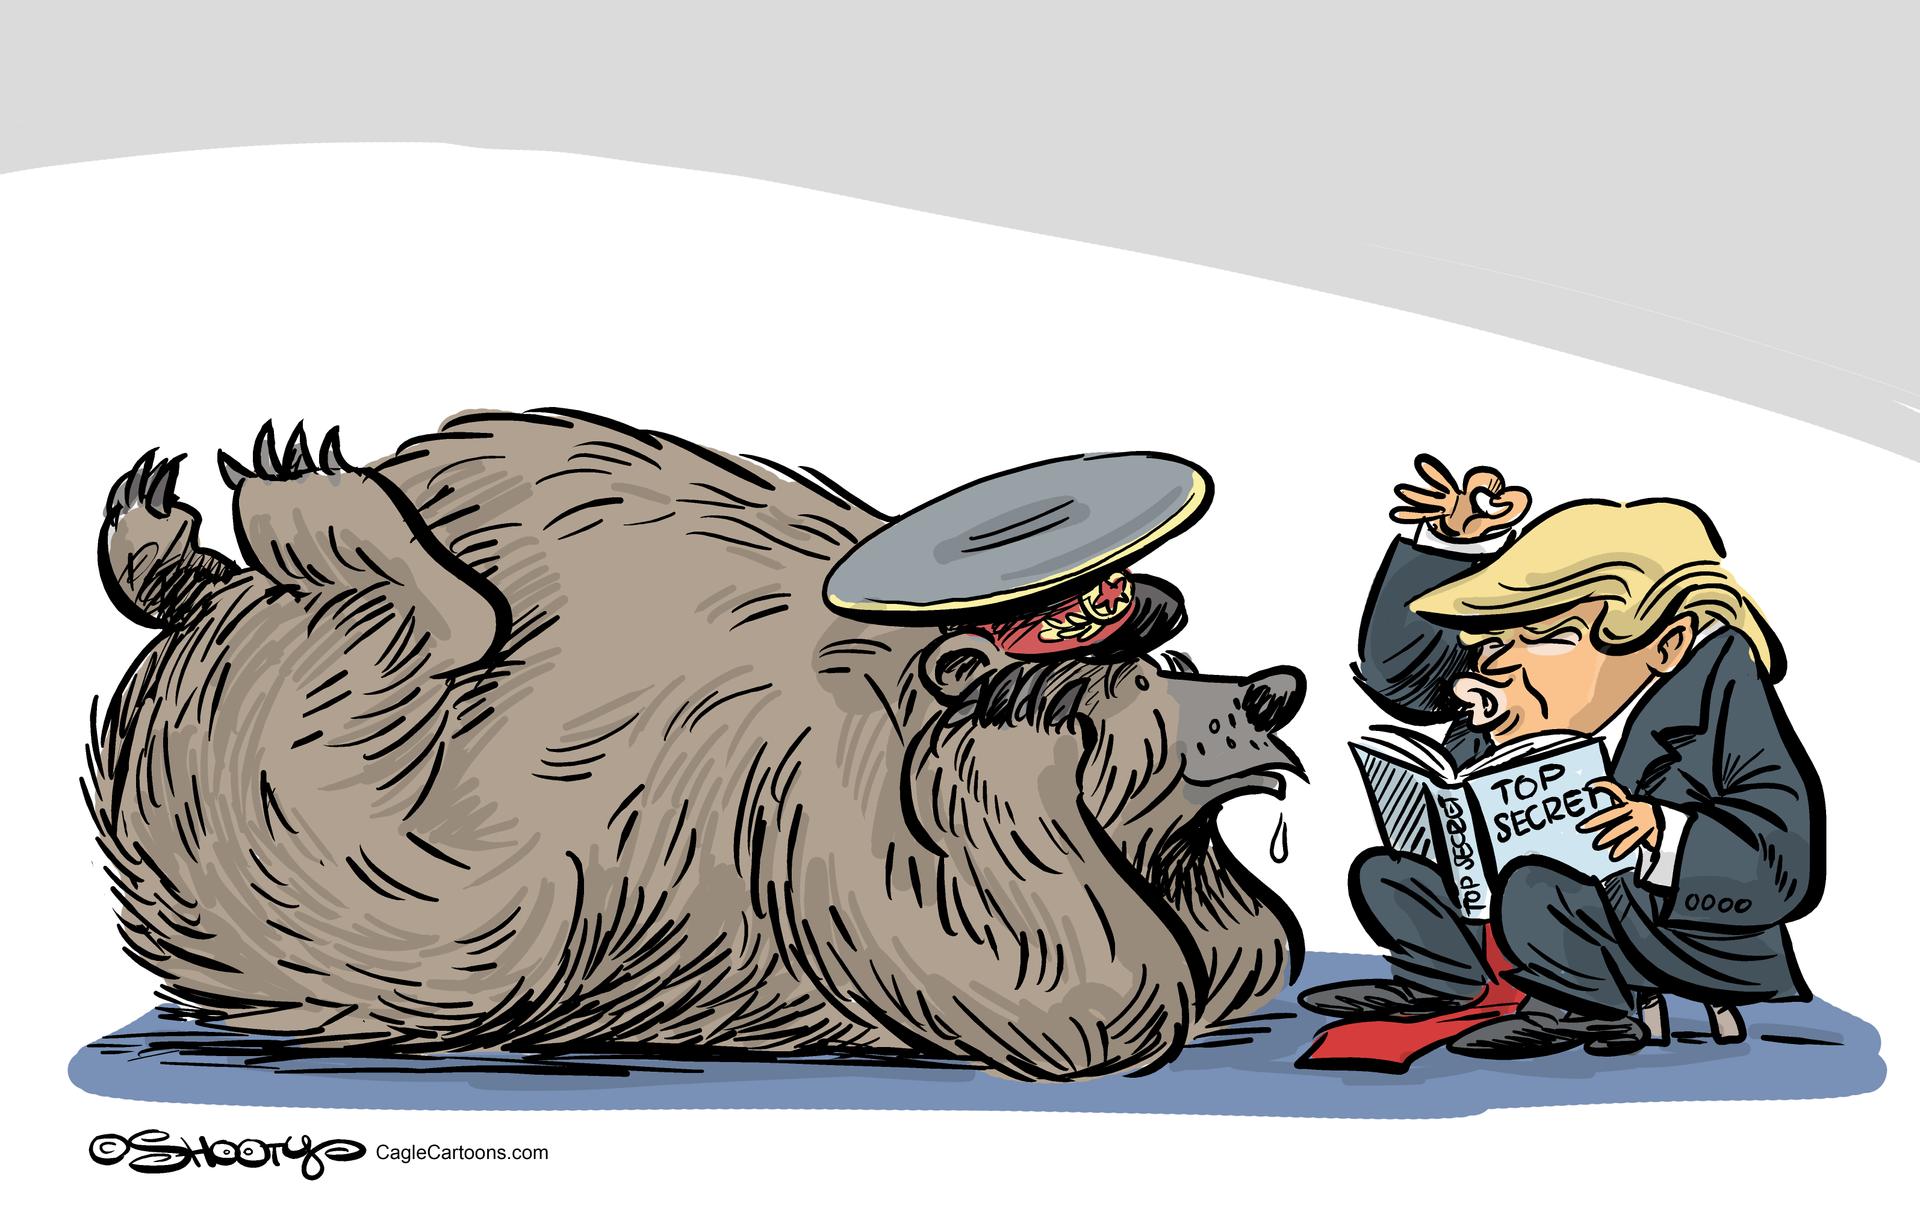 A Russian bear lying down, elbows on the floor and hands on his chin listening raptly to Trump as relays sensitive intelligence information.